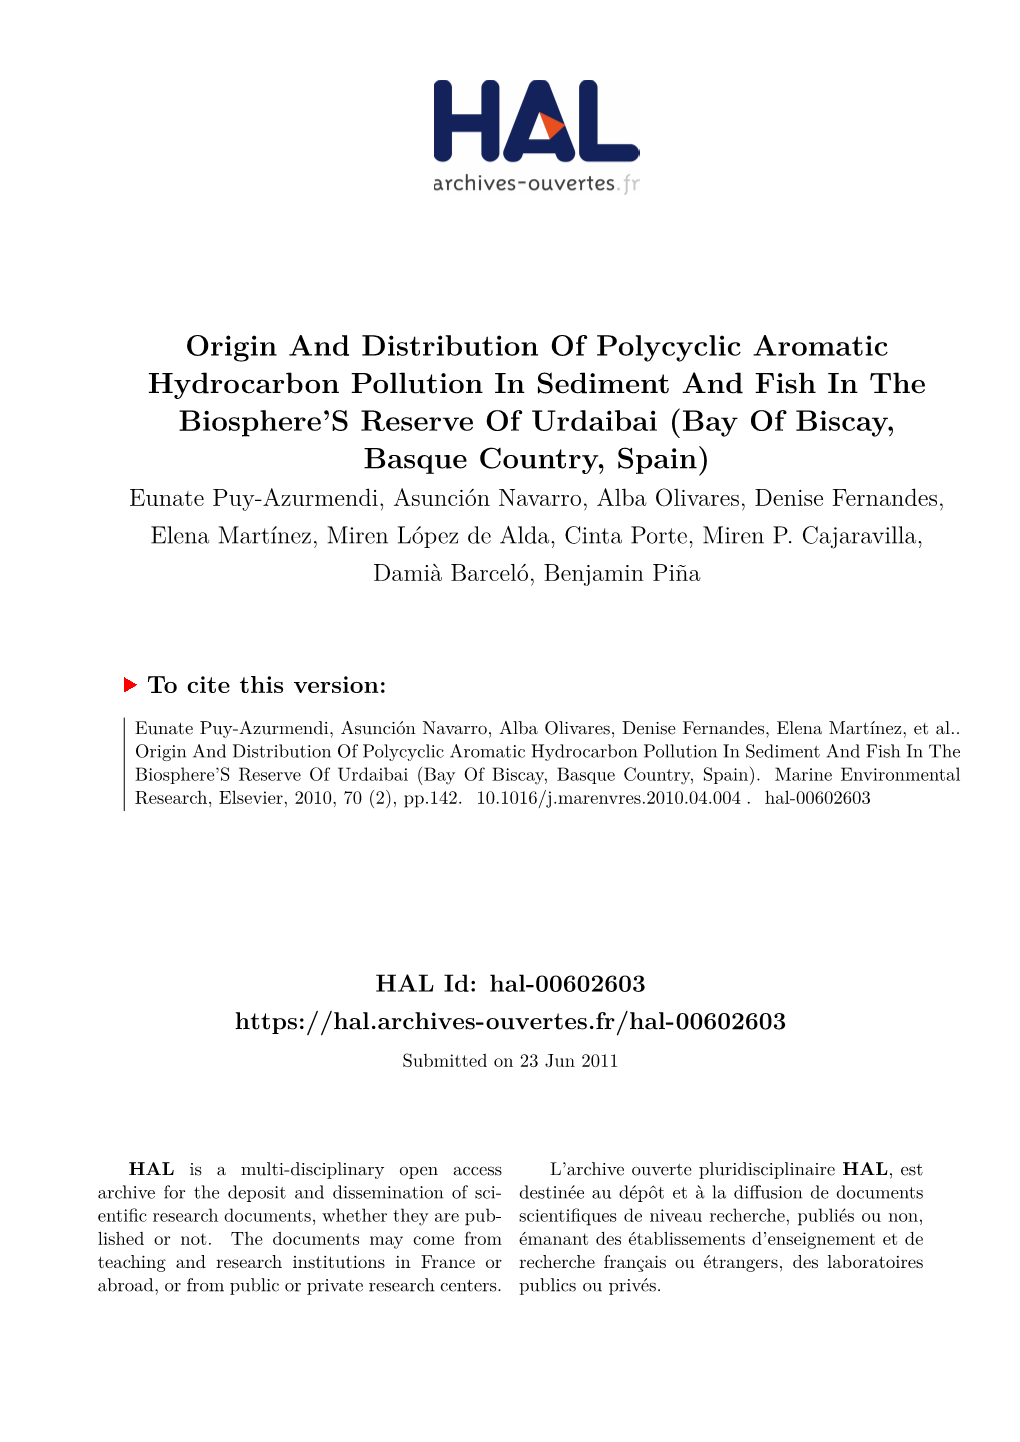 Origin and Distribution of Polycyclic Aromatic Hydrocarbon Pollution In